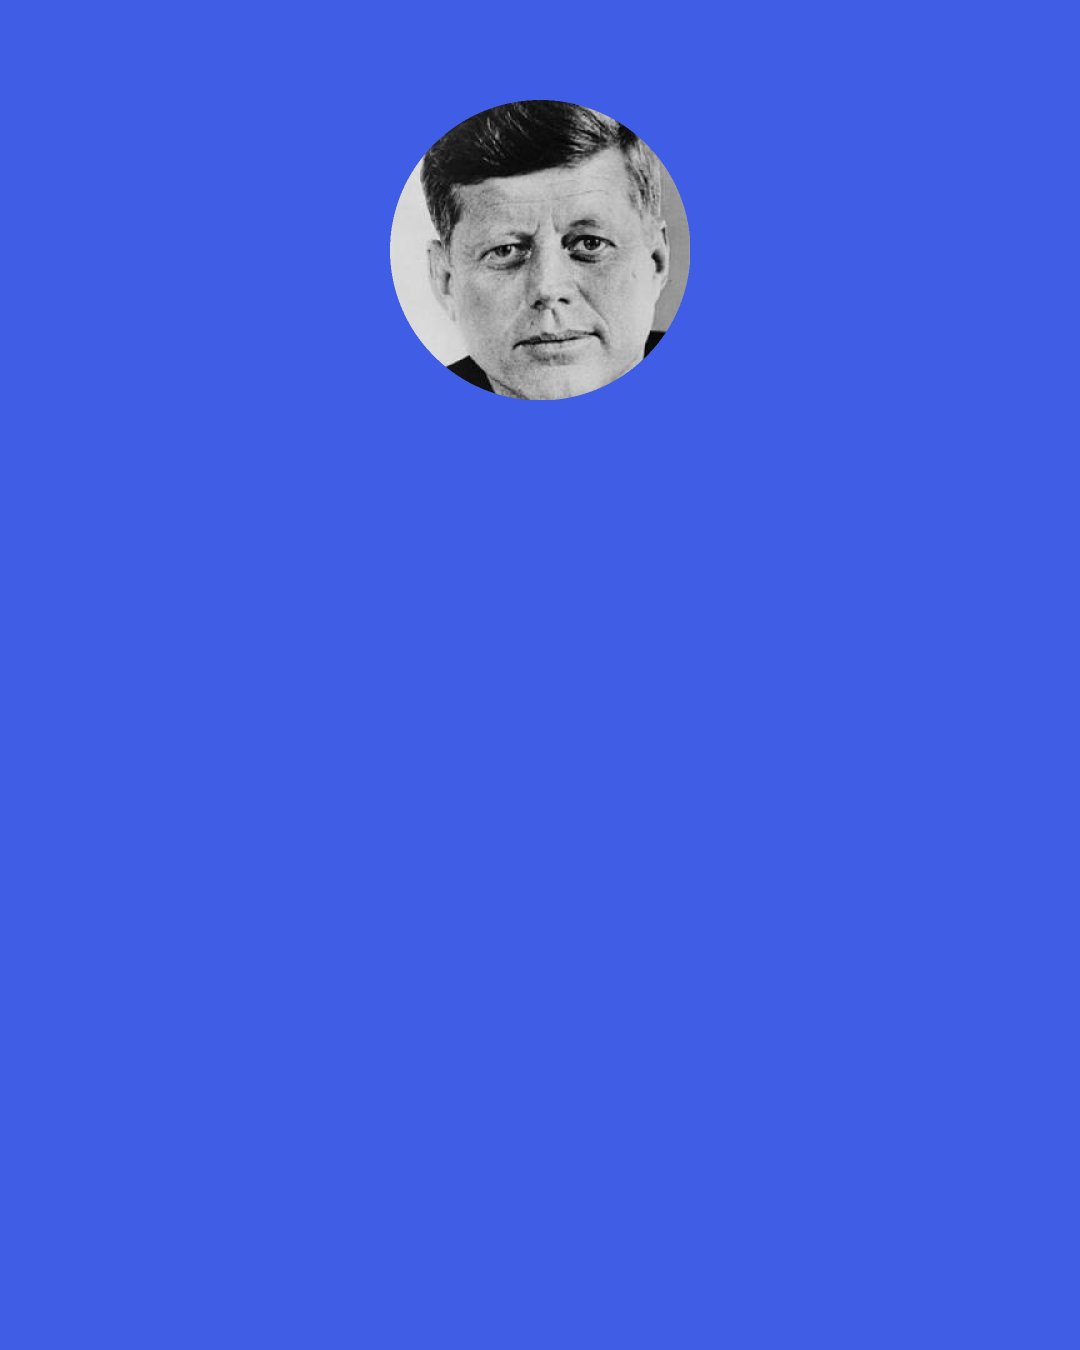 John F. Kennedy: For while this year it may be a Catholic against whom the finger of suspicion is pointed, in other years it has been, and may someday be again, a Jew— or a Quaker or a Unitarian or a Baptist. It was Virginia's harassment of Baptist preachers, for example, that helped lead to Jefferson's statute of religious freedom. Today I may be the victim, but tomorrow it may be you — until the whole fabric of our harmonious society is ripped at a time of great national peril.